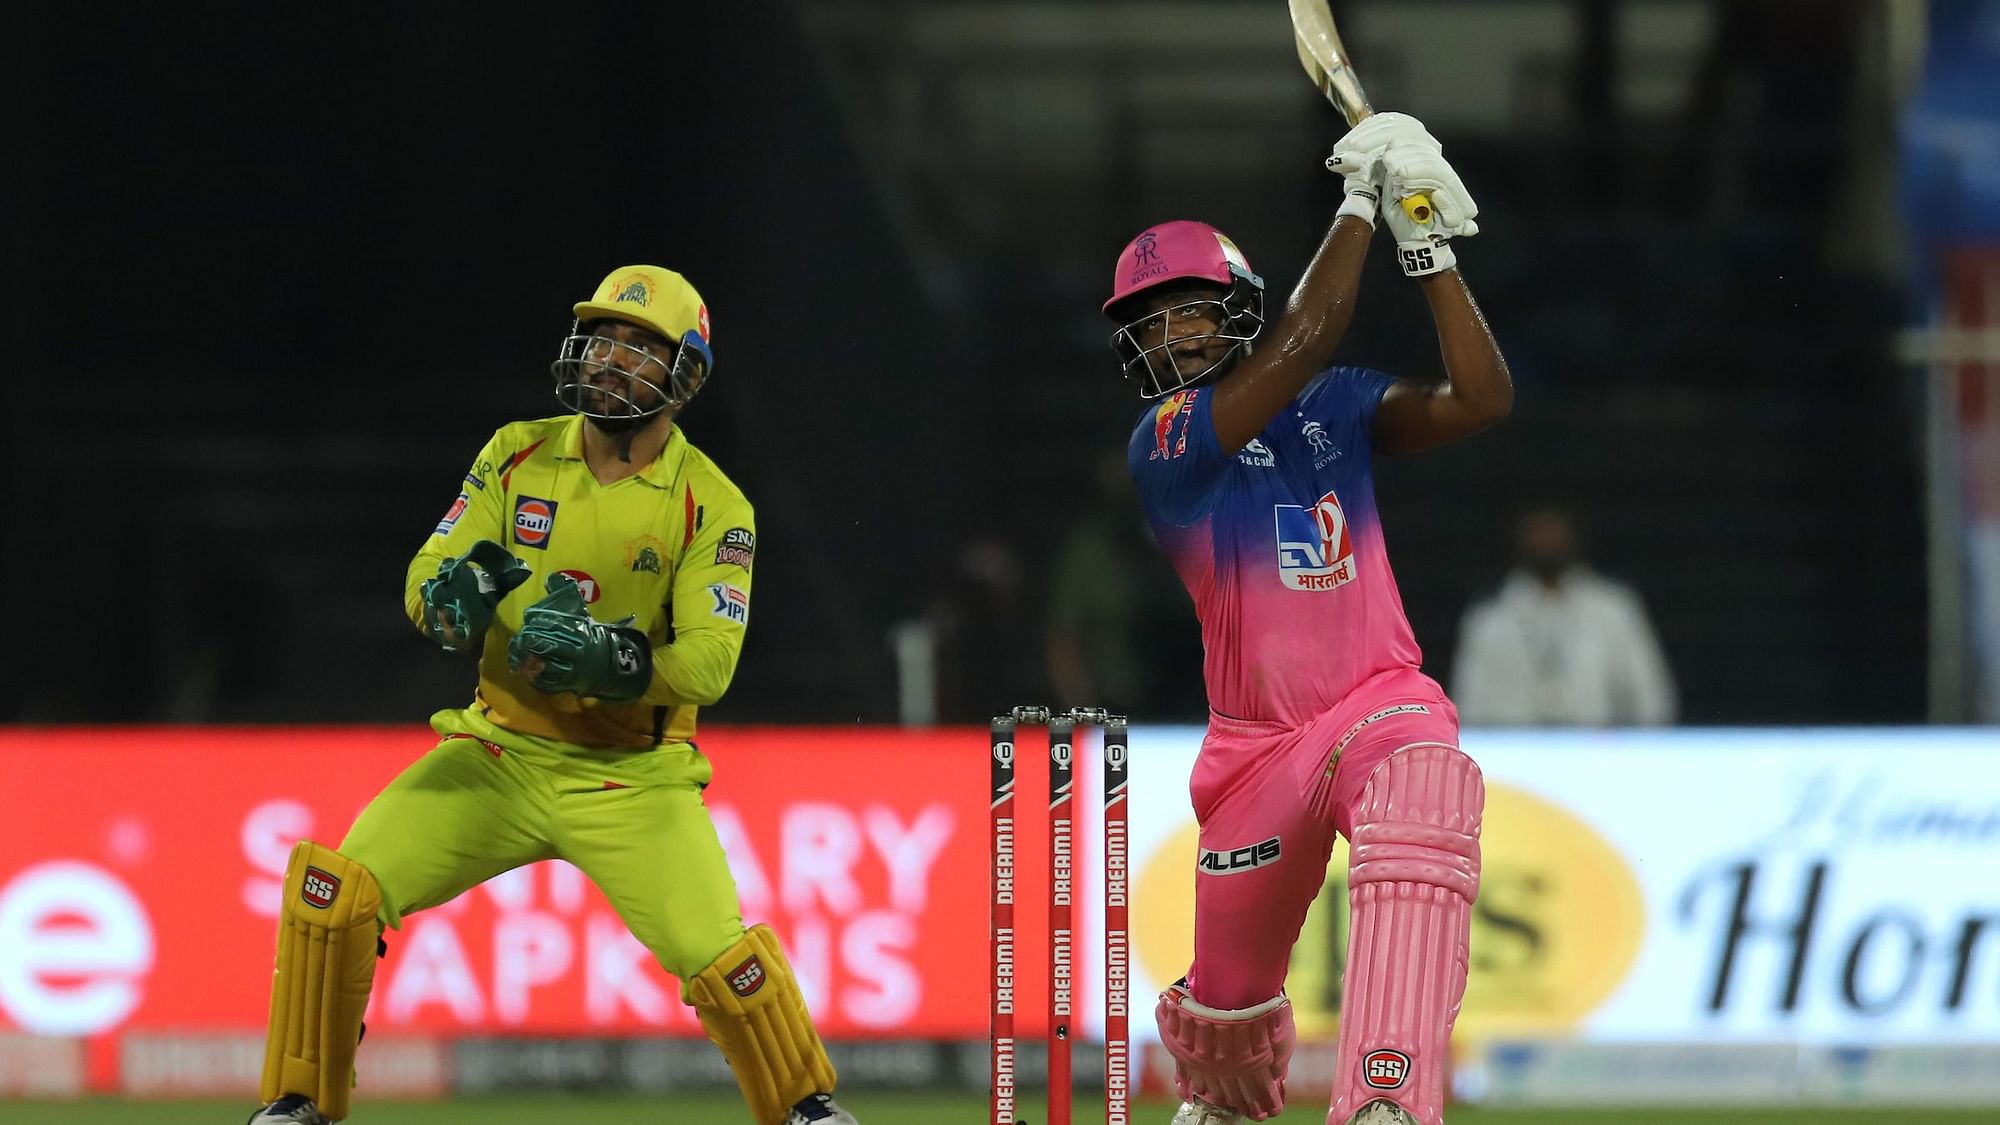 Sanju Samson’s explosive 74 of 32 and Steve Smith’s 69 powered the Rajasthan Royals to 216, the highest score so far in IPL 2020.